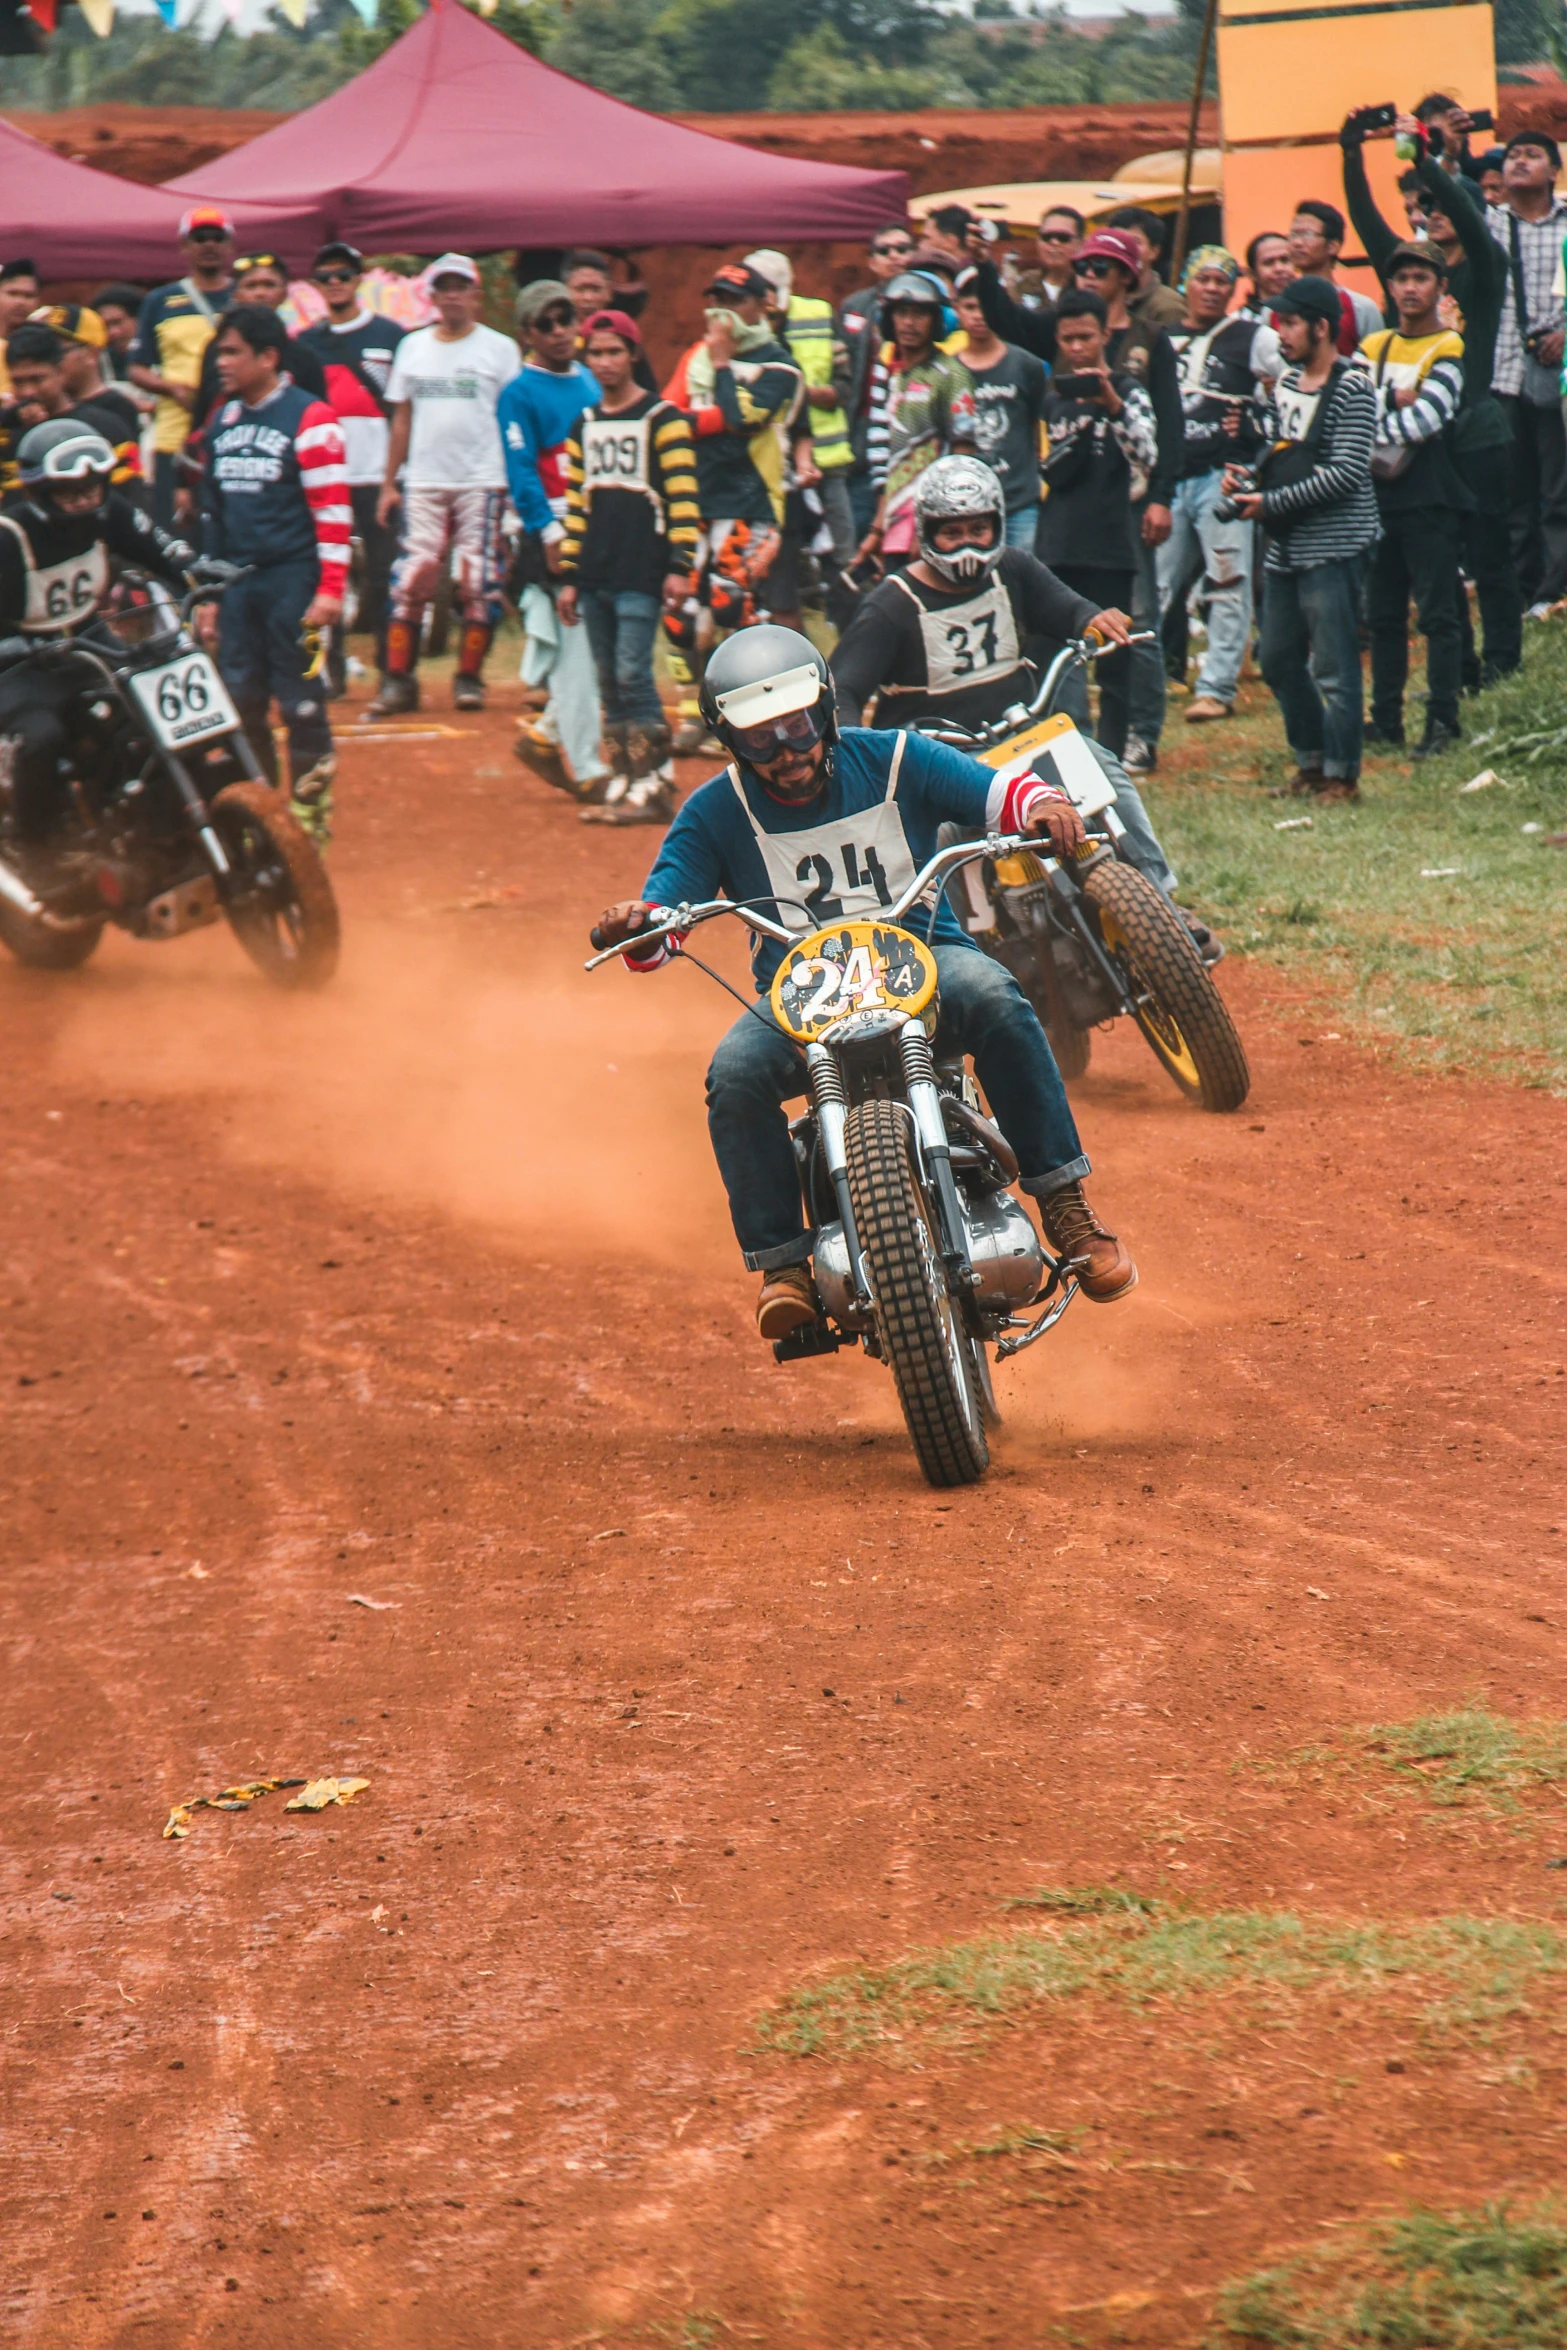 there are two dirt bike racers in the middle of a race